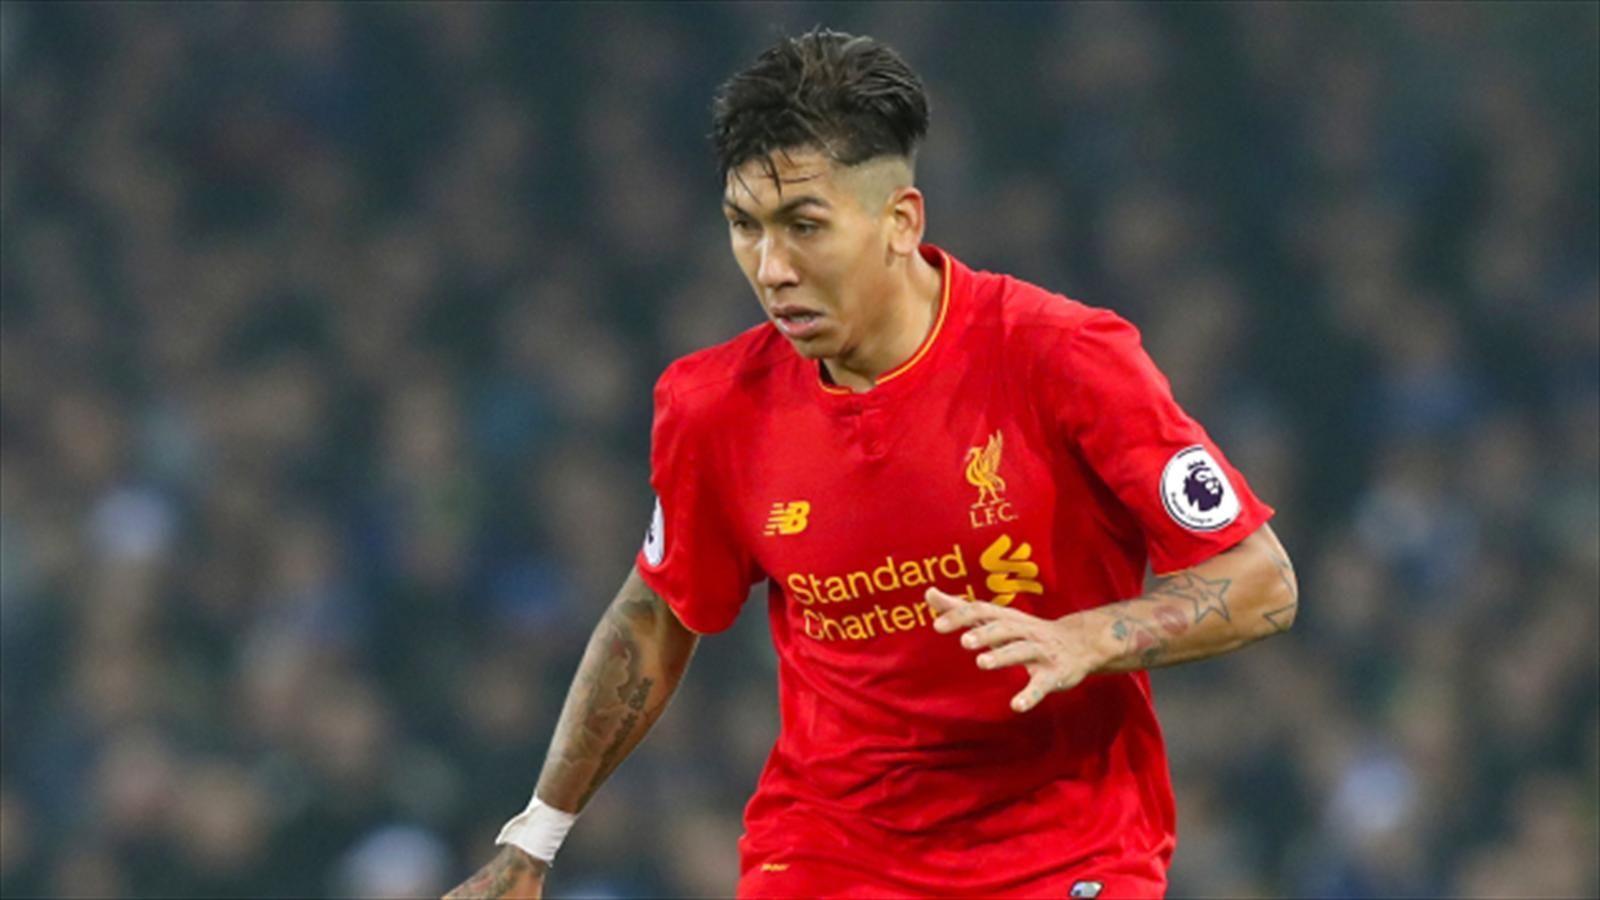 Liverpool's Roberto Firmino Faces Christmas Eve Drink Driving